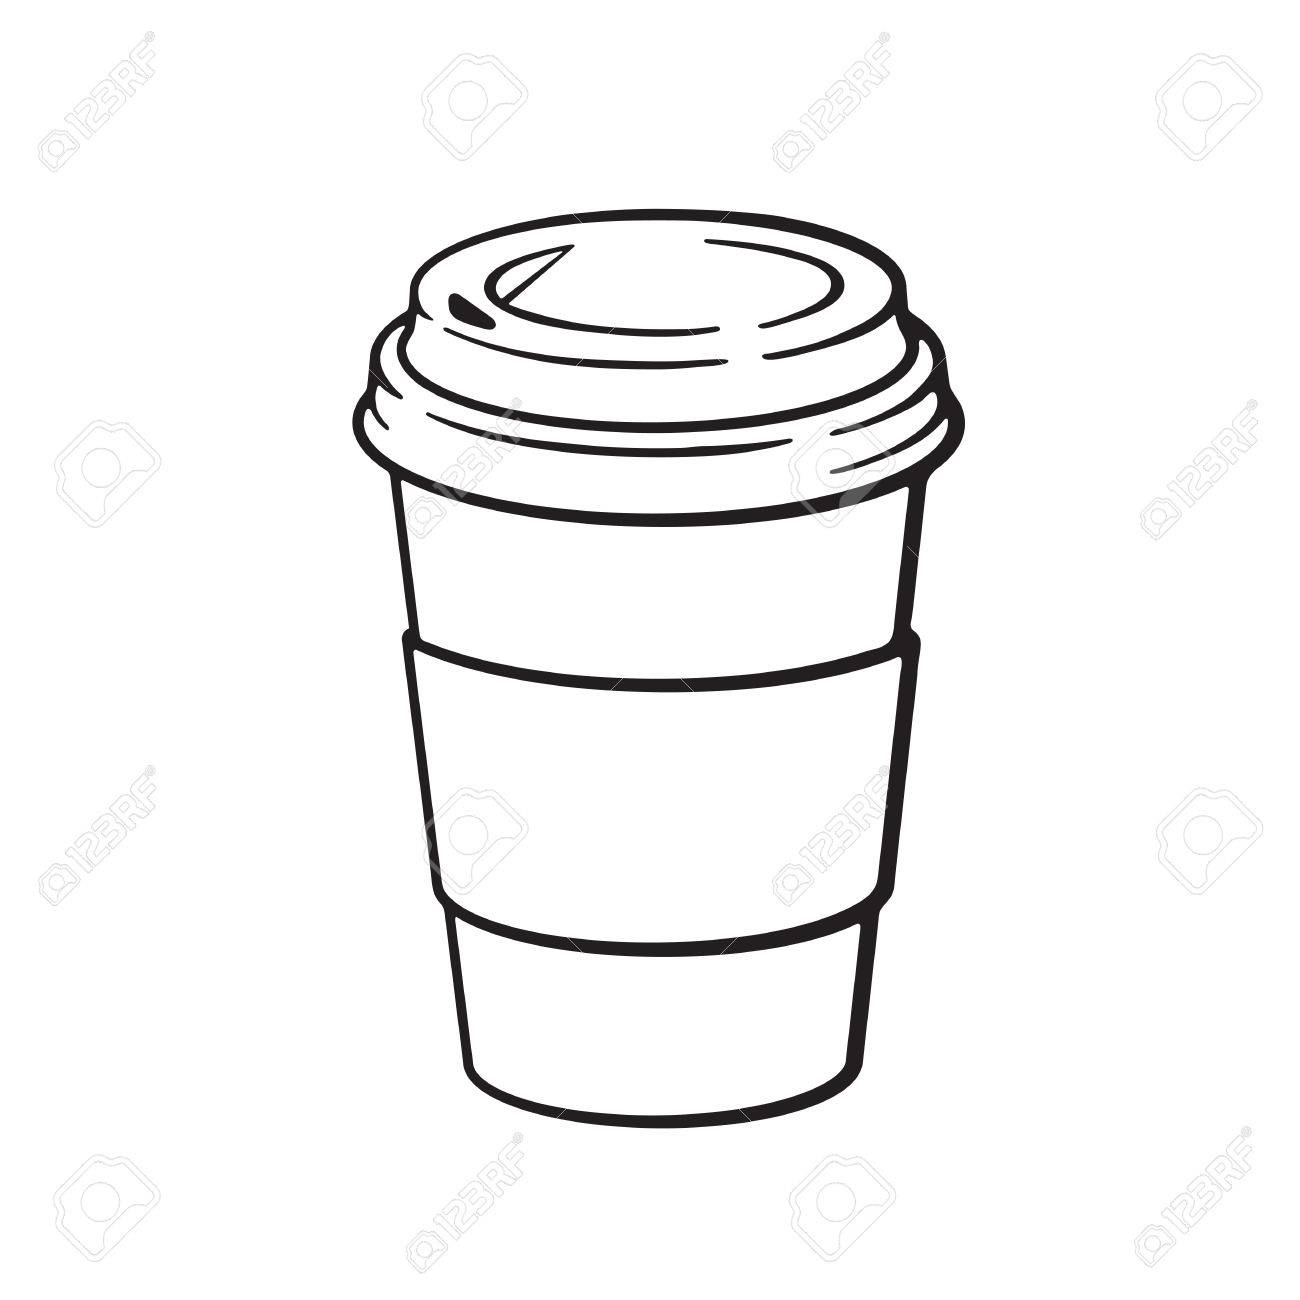 How To Draw A Paper Coffee Cup Paper coffee cup design templates